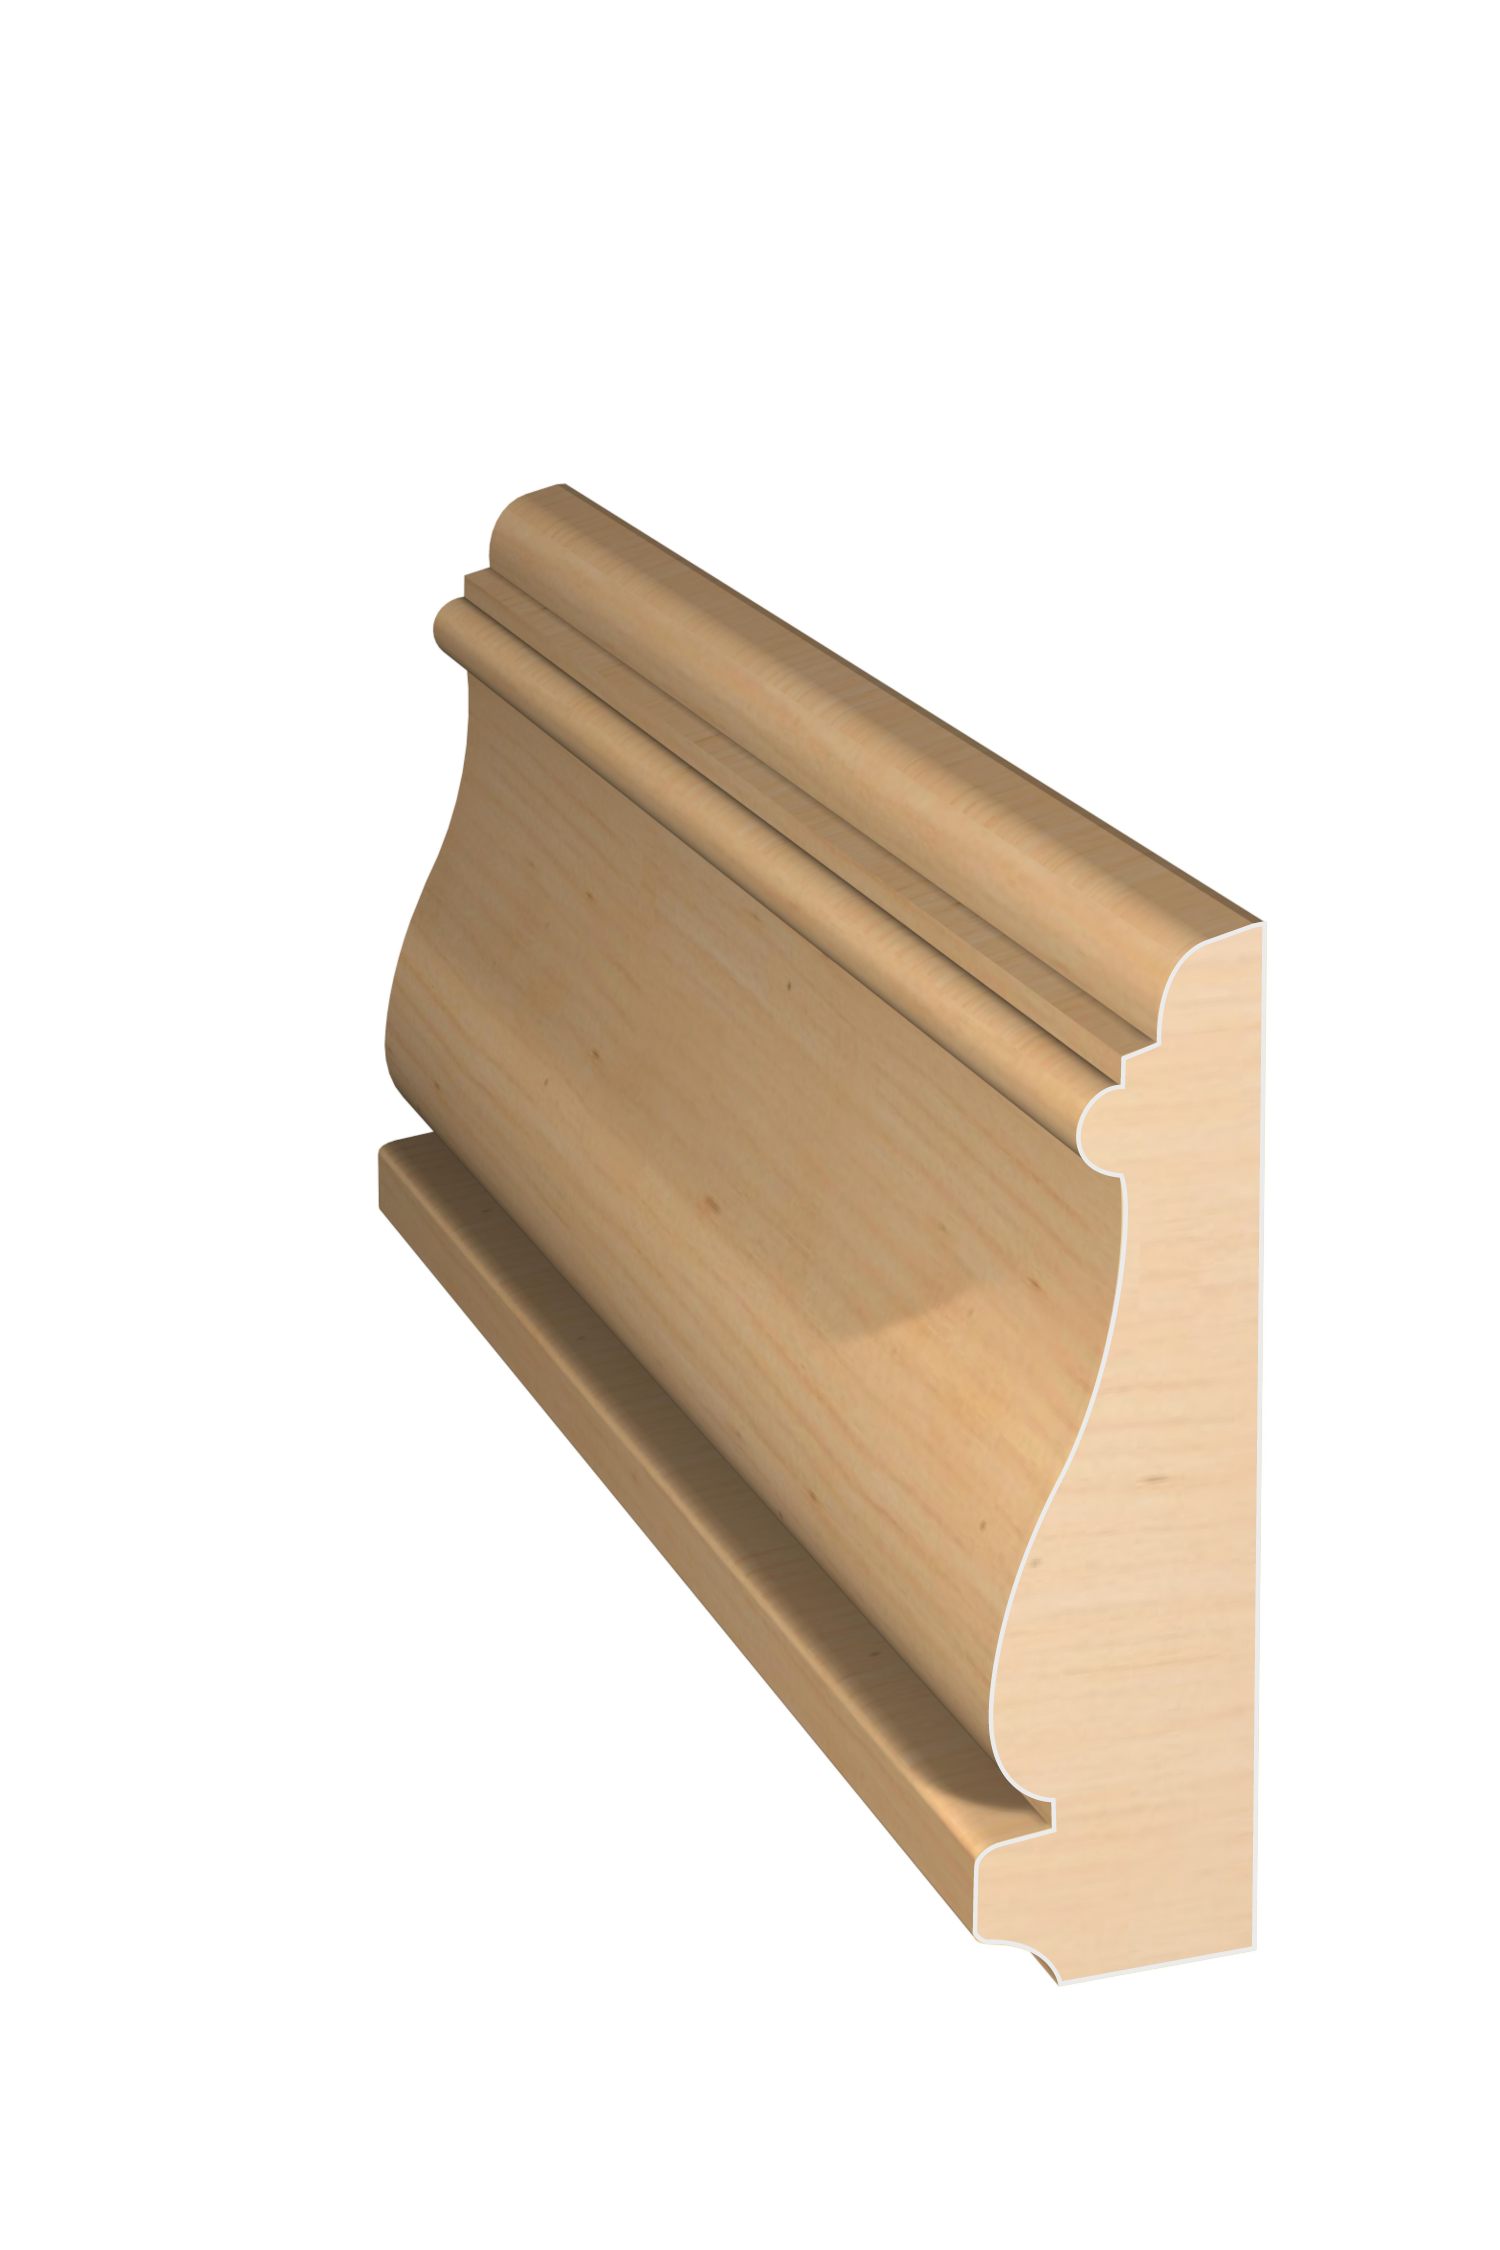 Three dimensional rendering of custom casing wood molding CAPL23415 made by Public Lumber Company in Detroit.